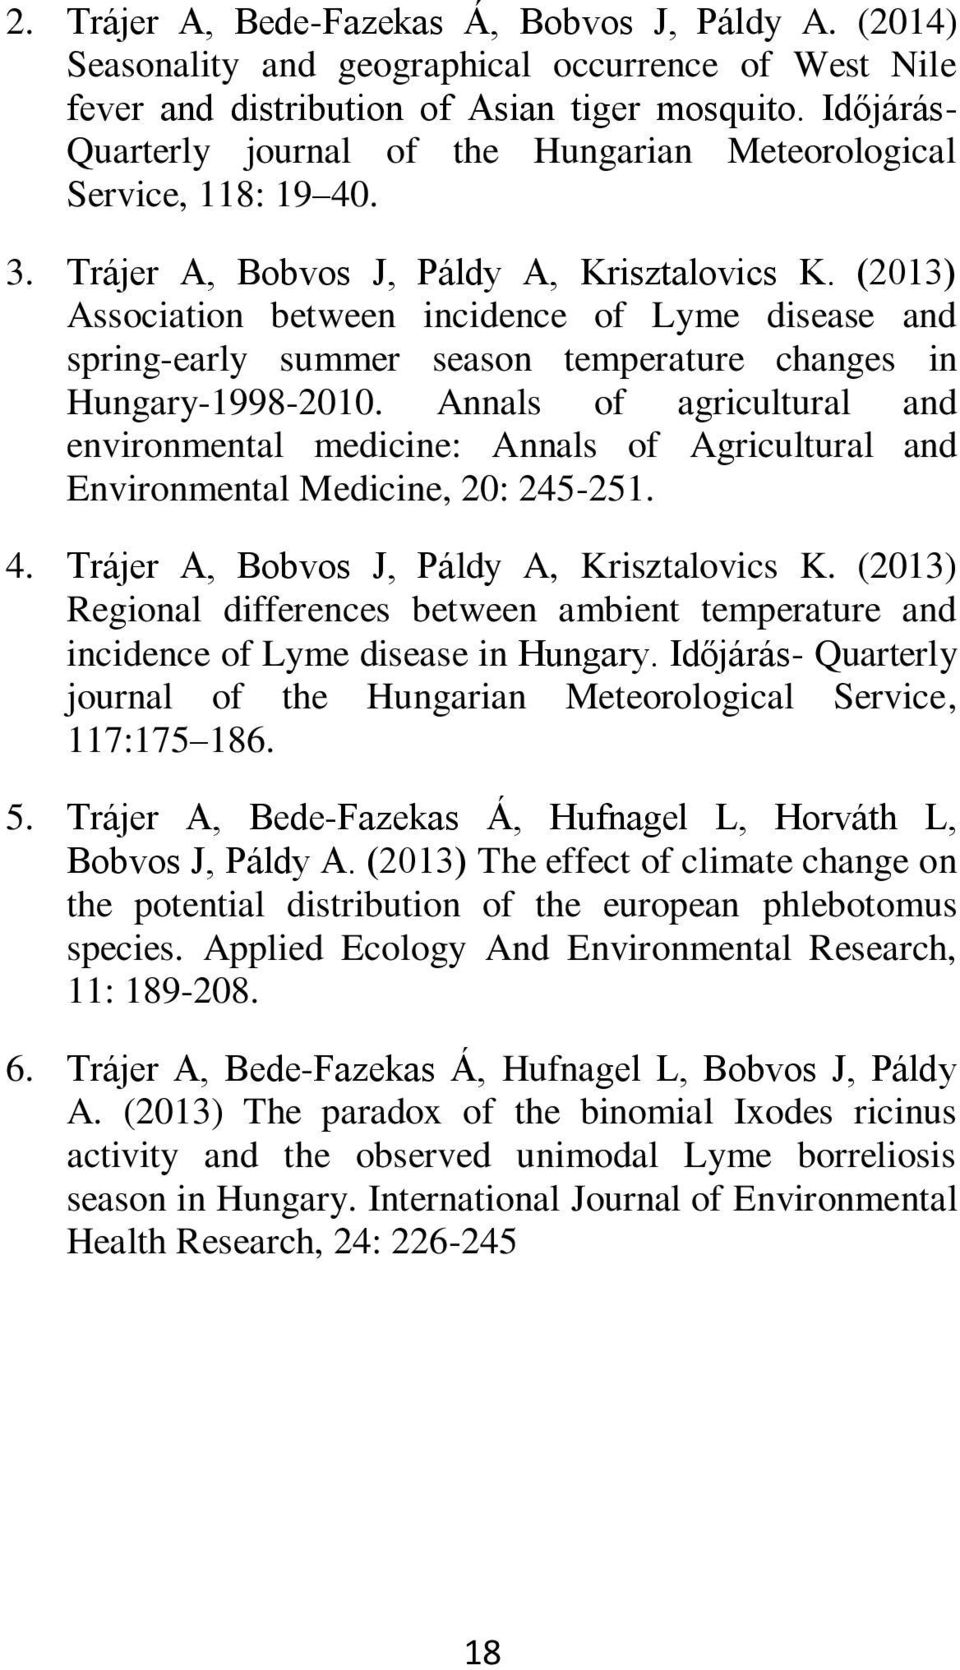 (2013) Association between incidence of Lyme disease and spring-early summer season temperature changes in Hungary-1998-2010.